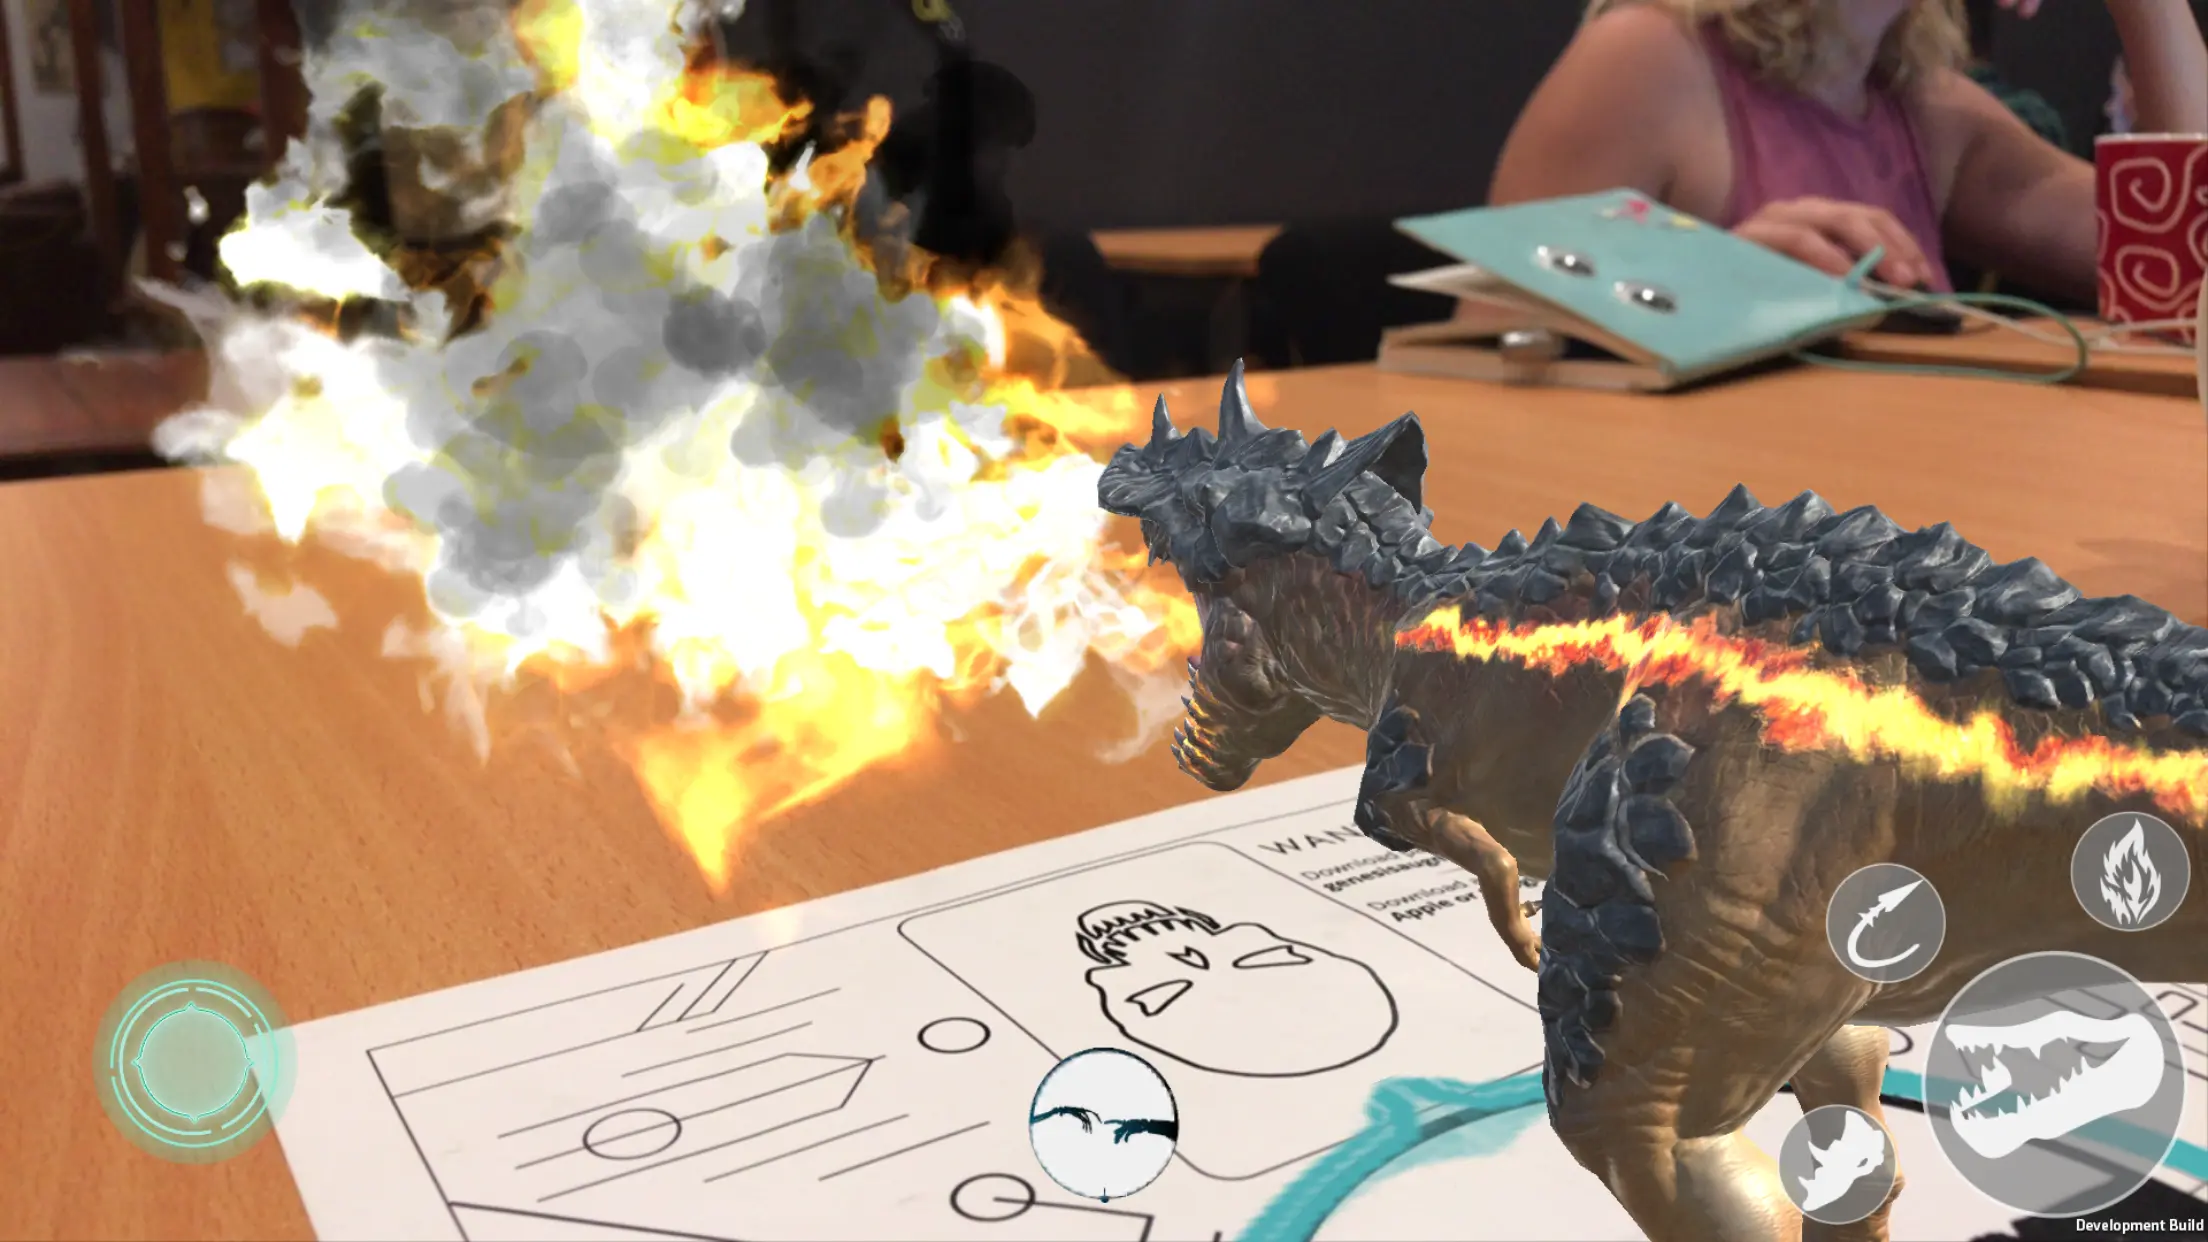 Genesis Augmented Reality playable character called Tyrant in Augmented Reality on a table